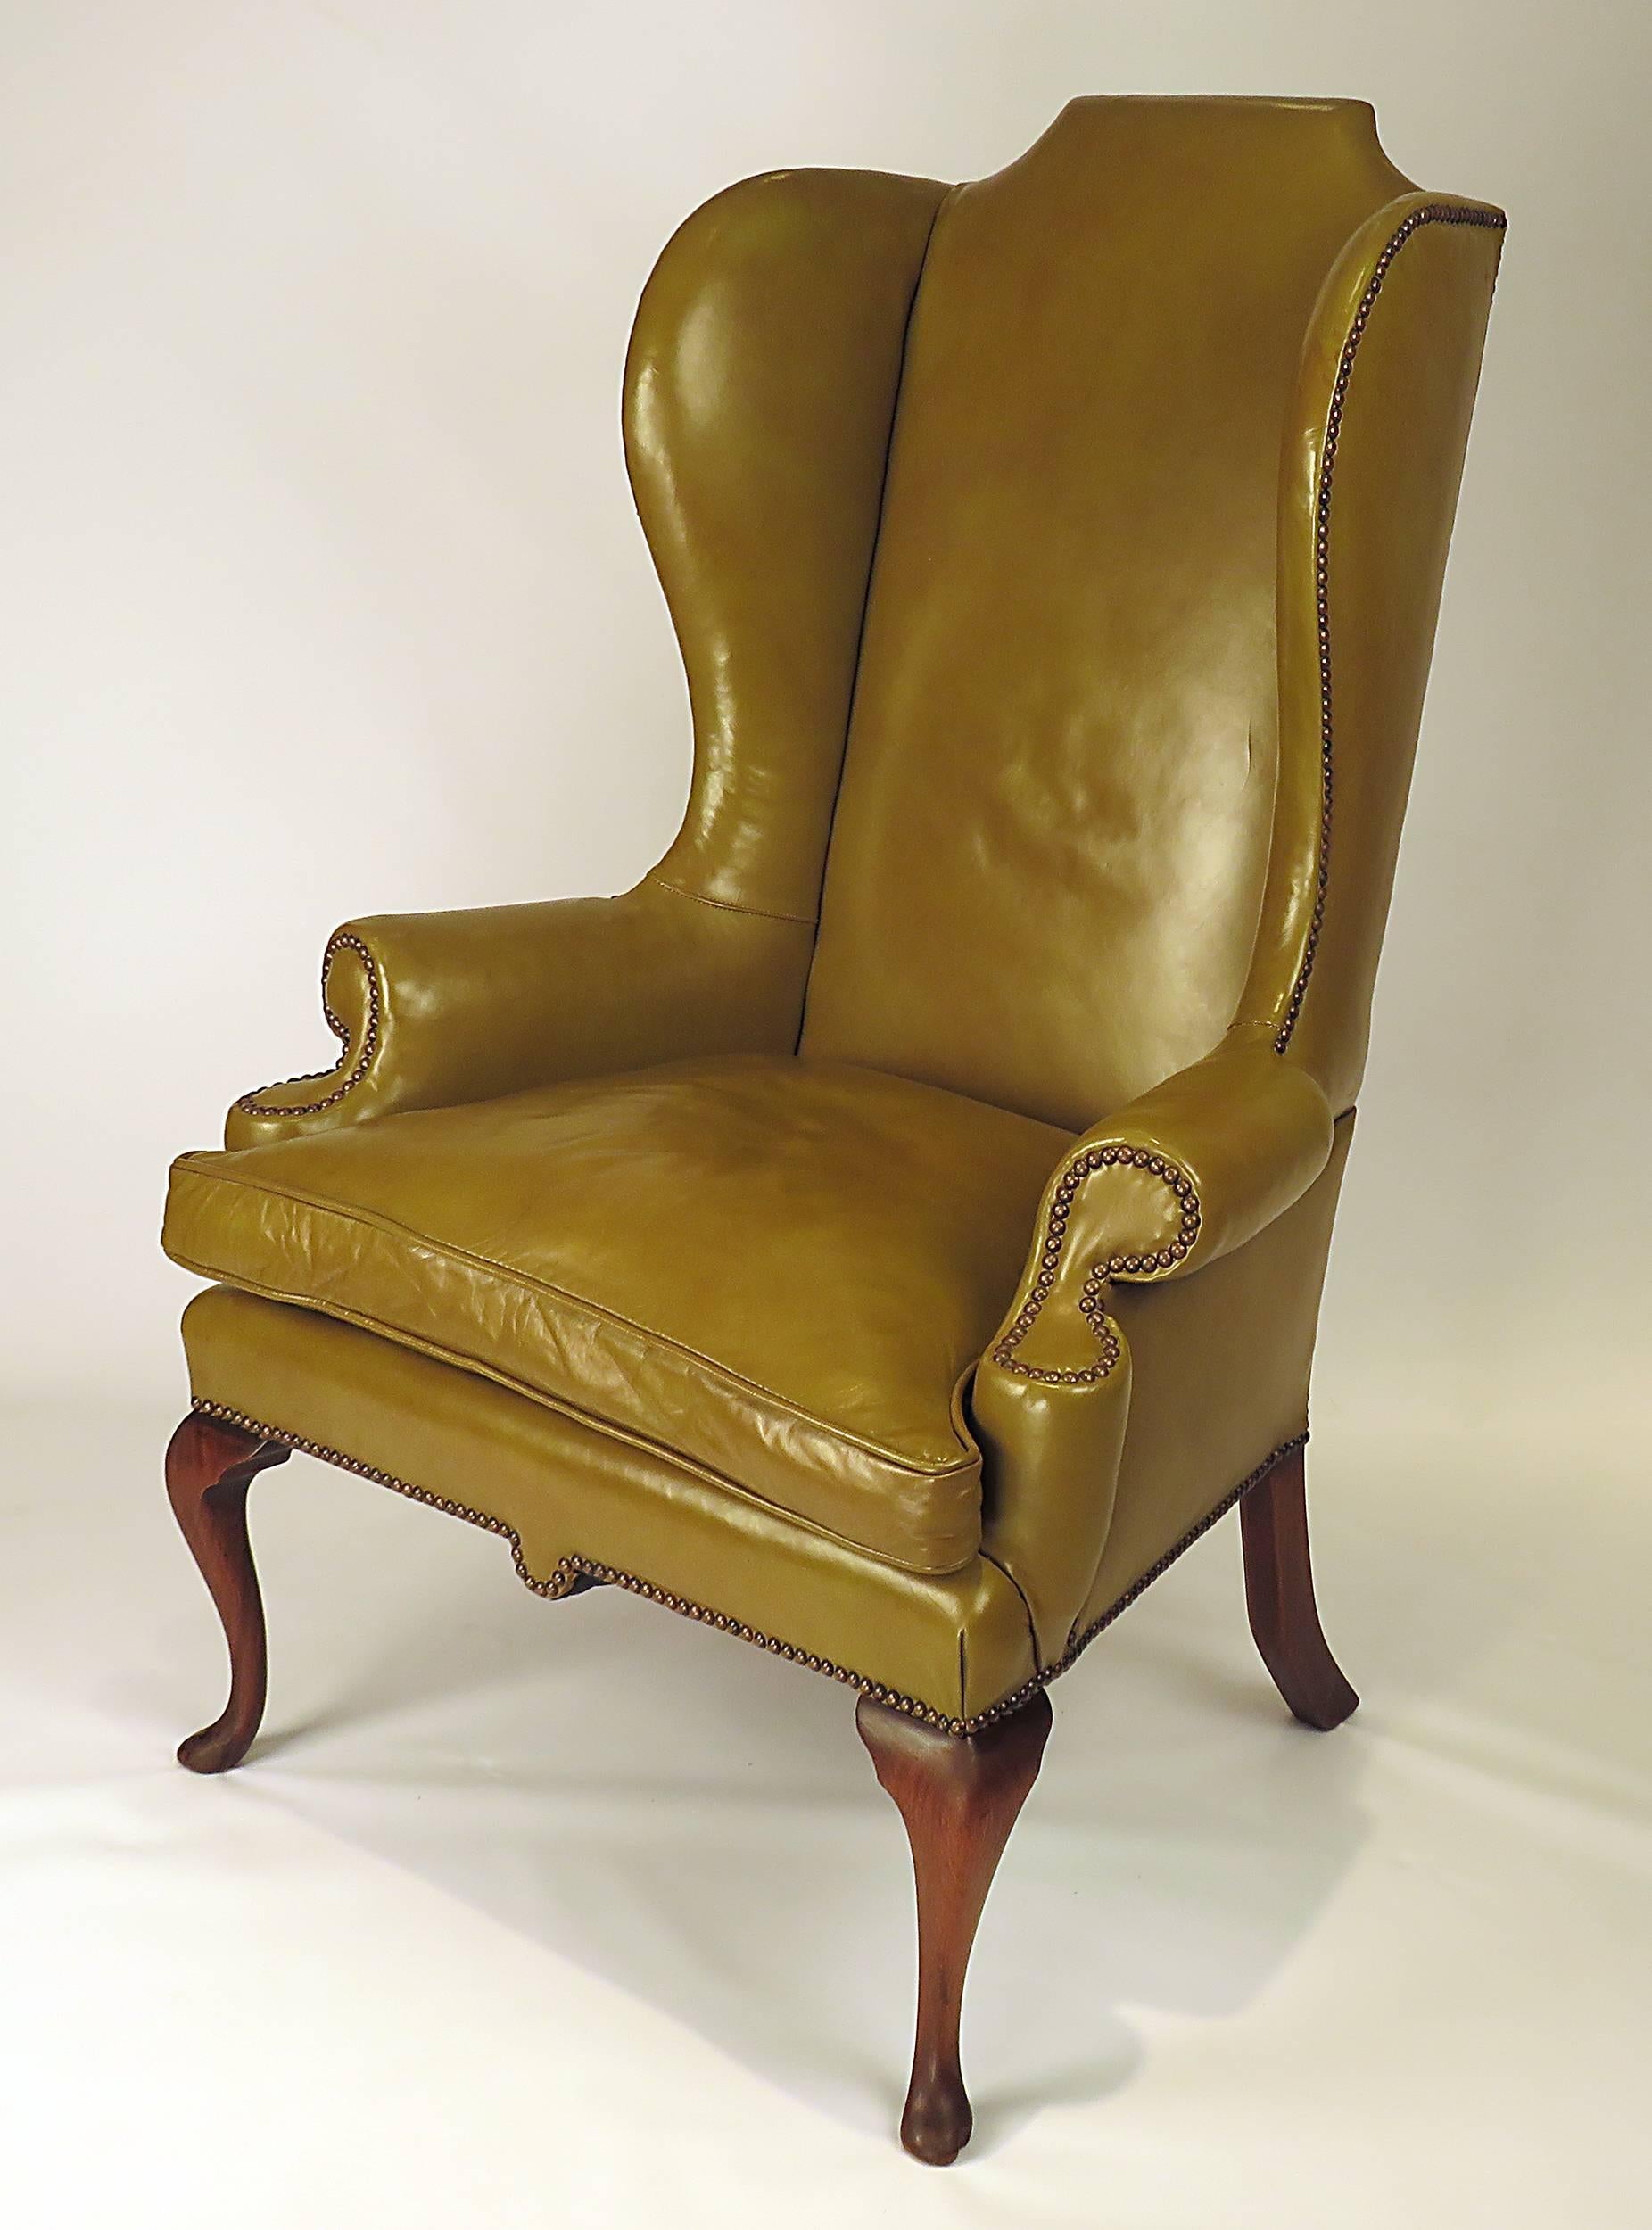 A well-proportioned English vintage olive green hide leather wing chair. Quality construction with nicely worn real leather. Classic design first seen, circa 1720. Comfortable and practical.